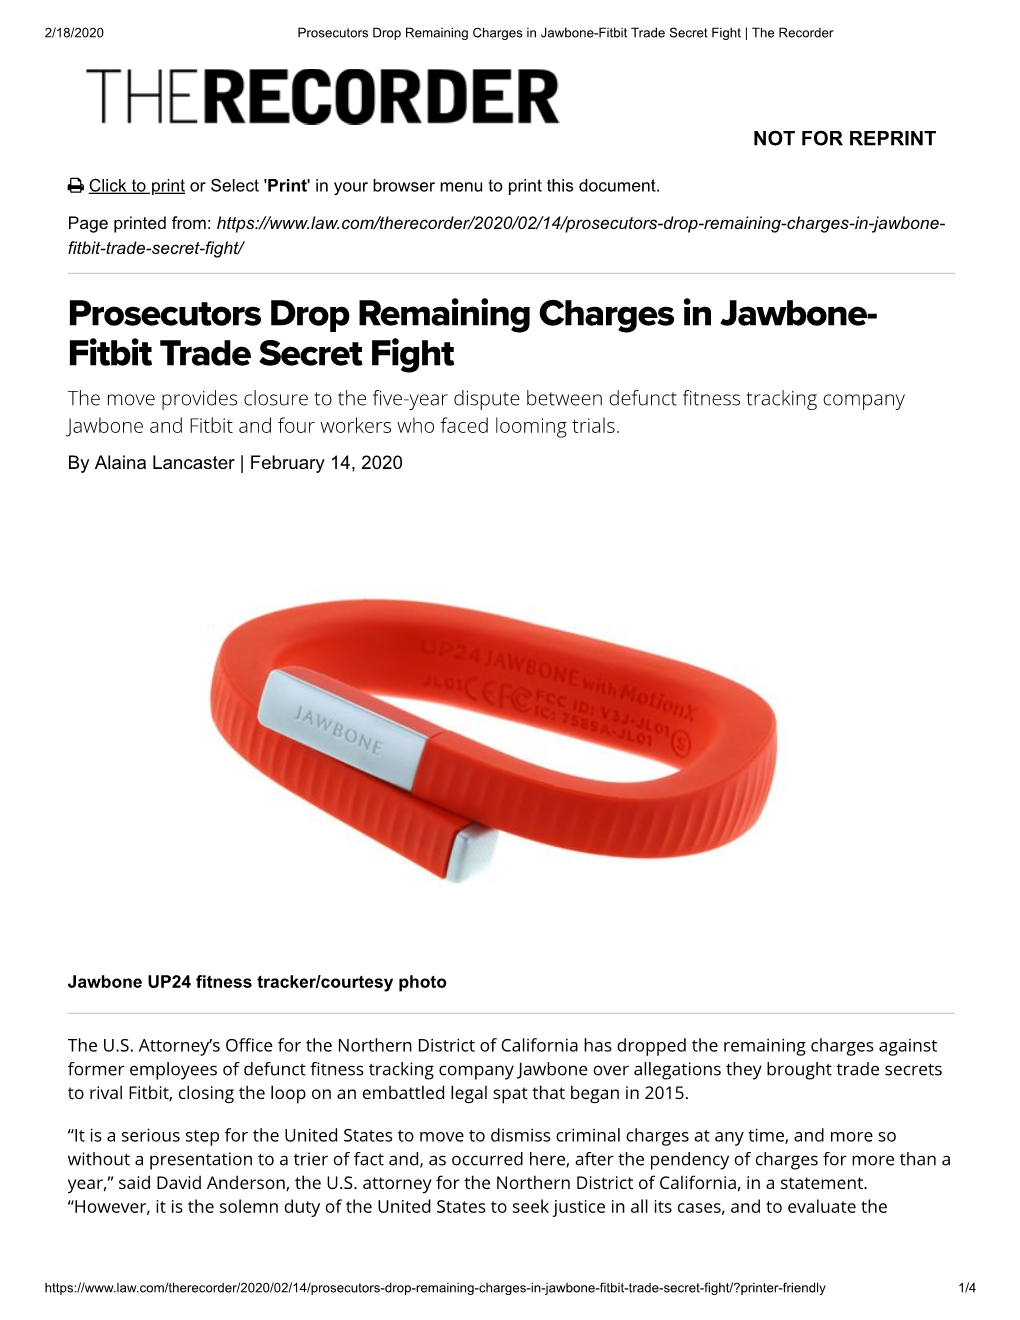 Prosecutors Drop Remaining Charges in Jawbone- Fitbit Trade Secret Fight